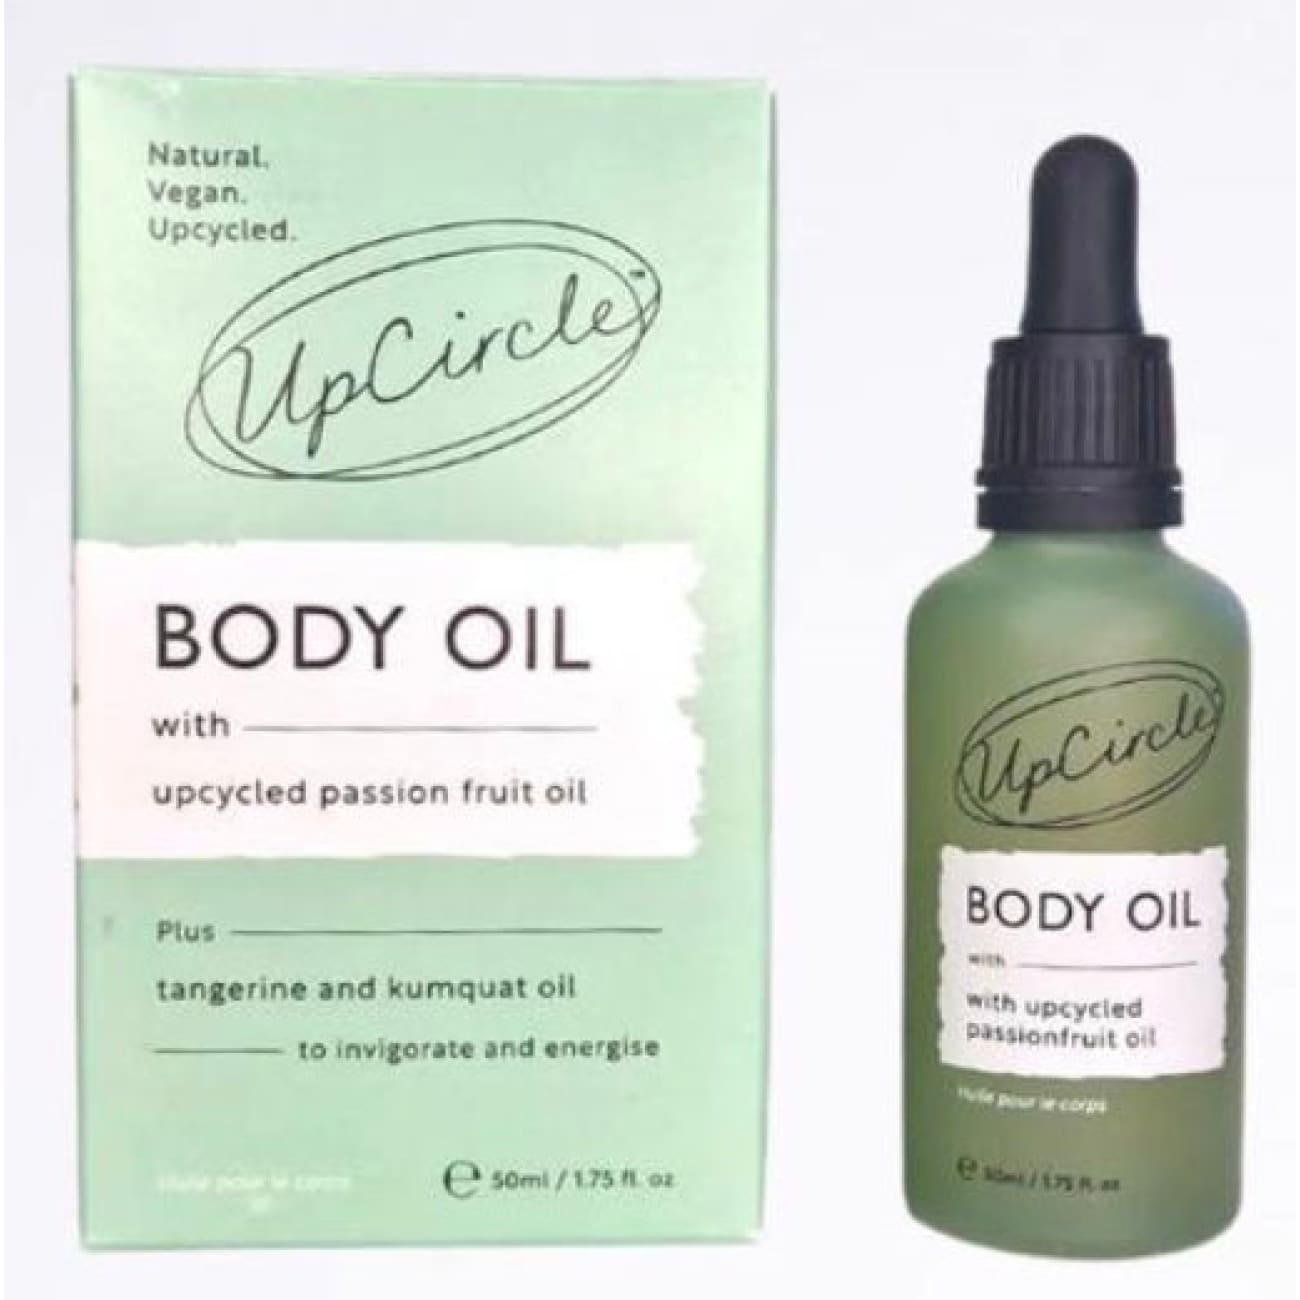 BODY OIL WITH UPCYCLED PASSION FRUIT OIL Rock Chocs 